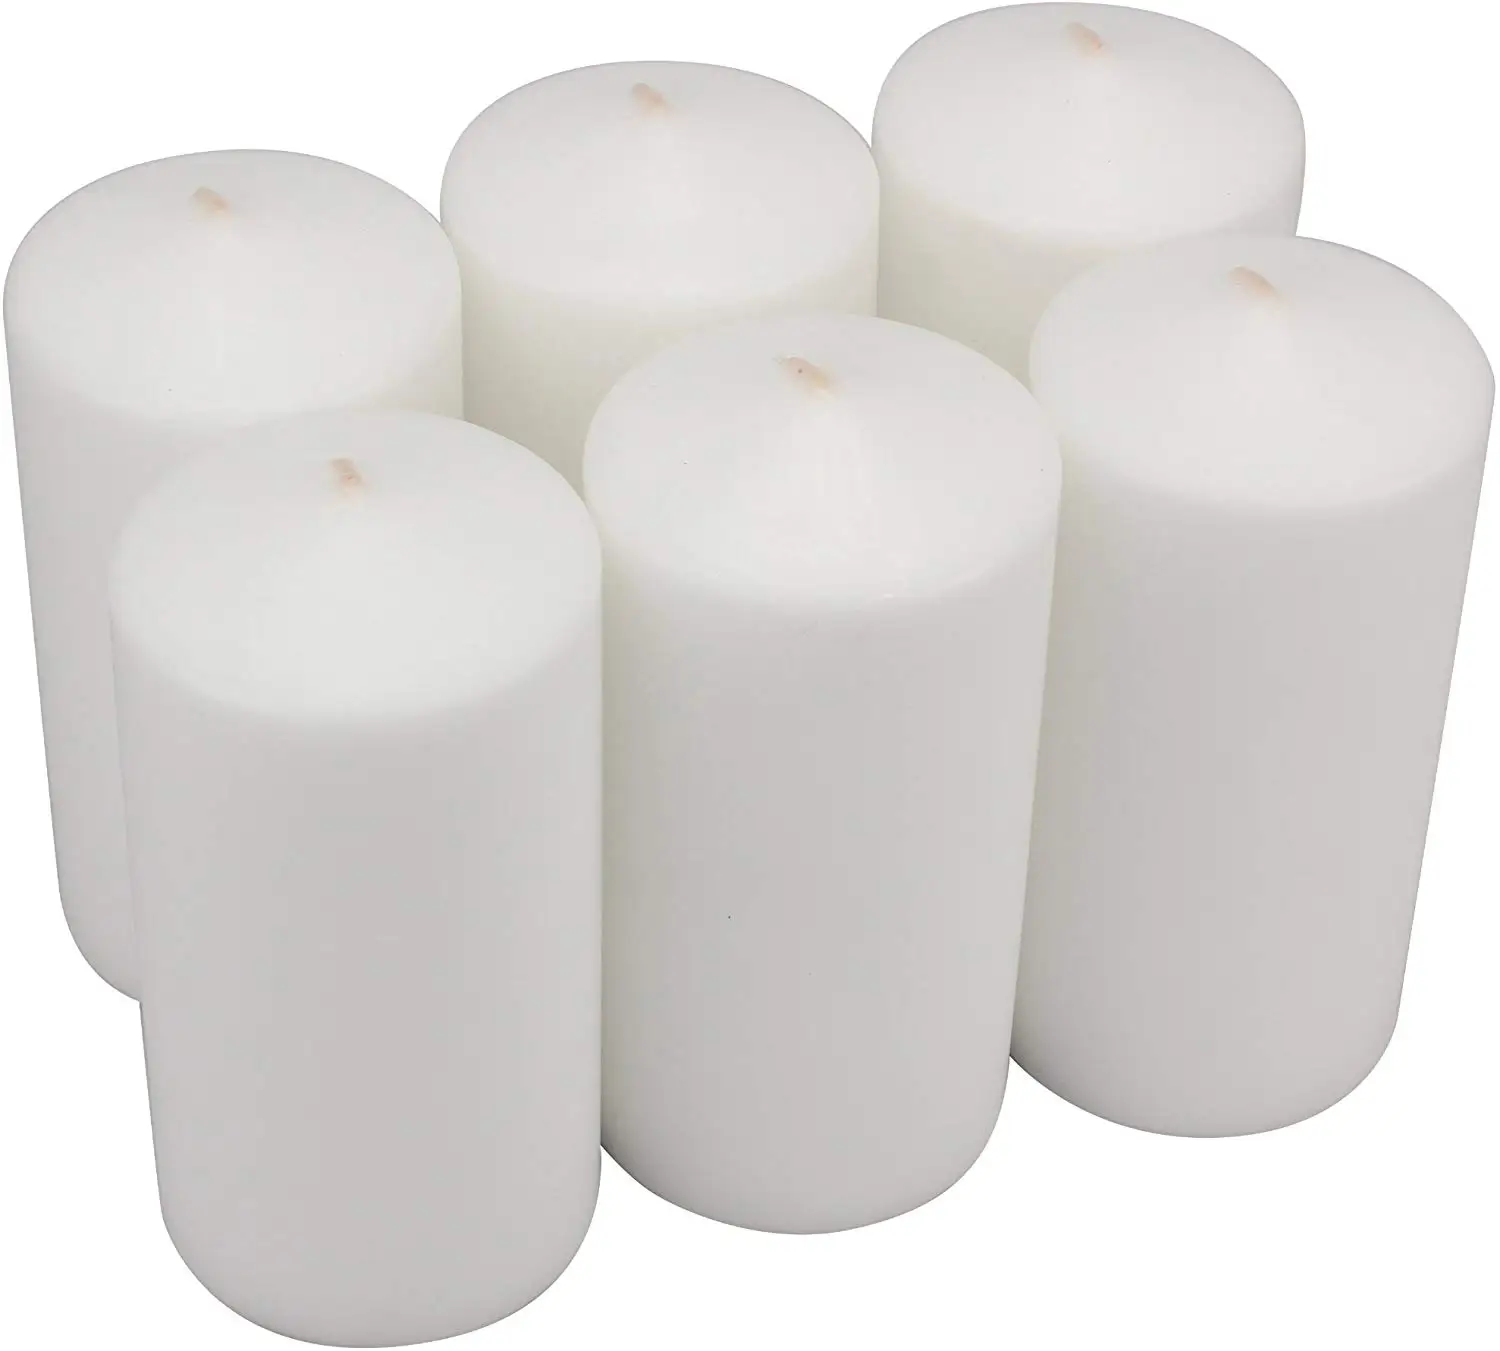 FREE SHIPPING!!! highest quality pack of six Church Pillar Candles 70/120 